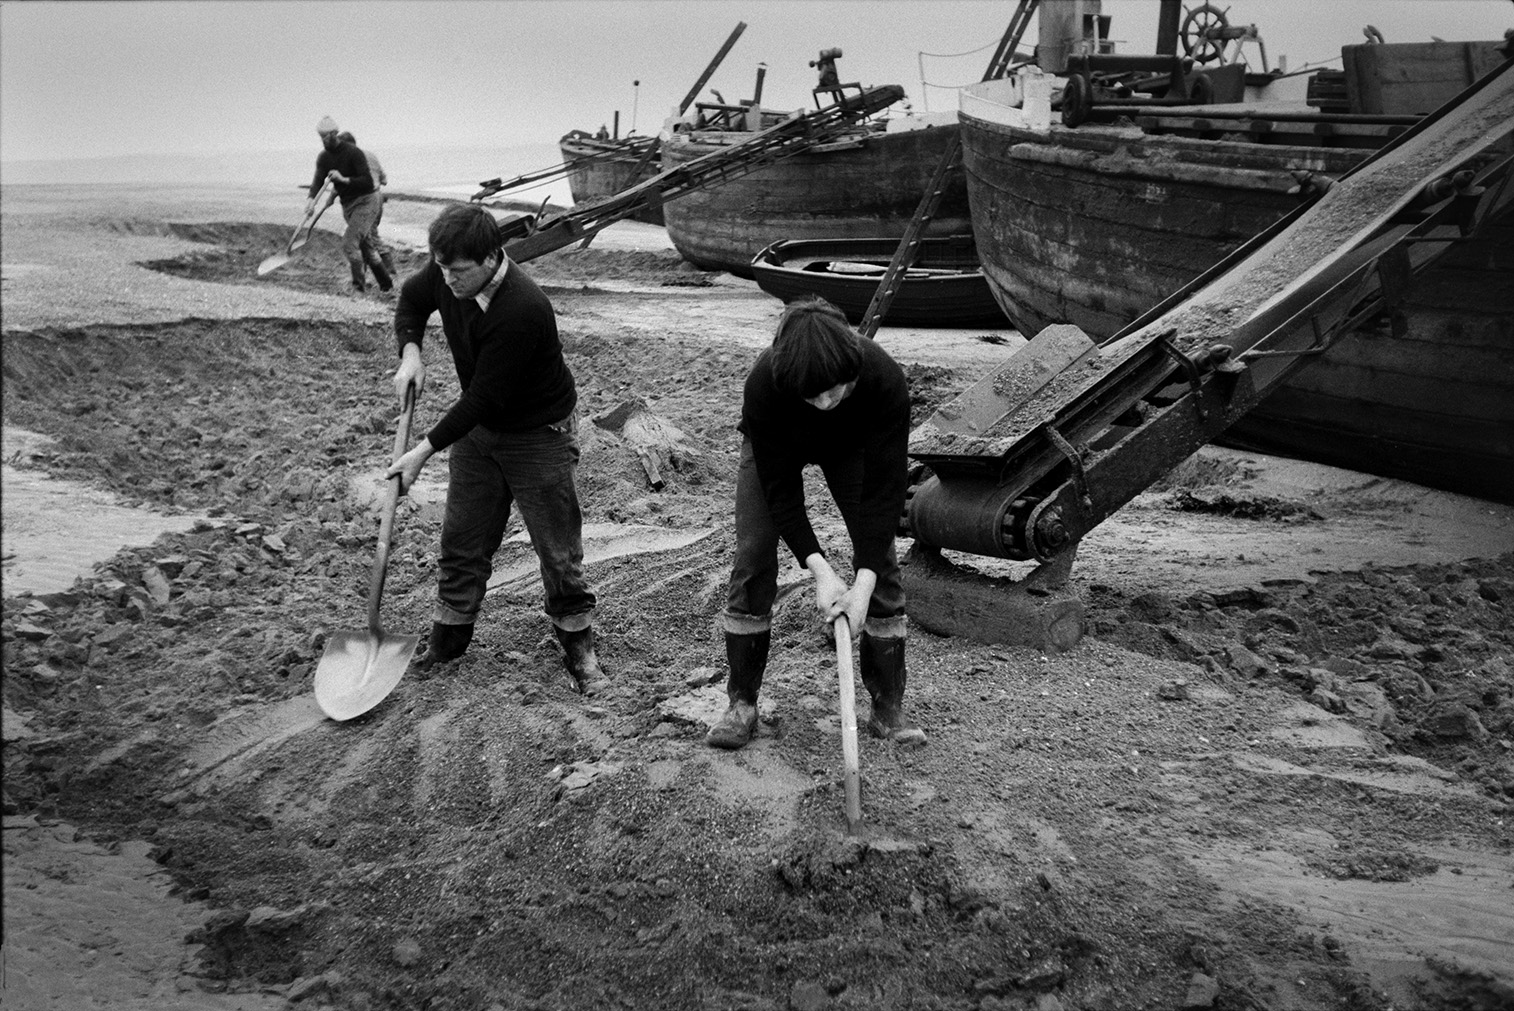 Men shovelling sand from the beach onto a conveyor belt or elevator attached to a sand barge at Crow Point, Braunton. The man on the left may be John Daniel. Two other barges being loaded with sand and a rowing boat can be seen behind them.